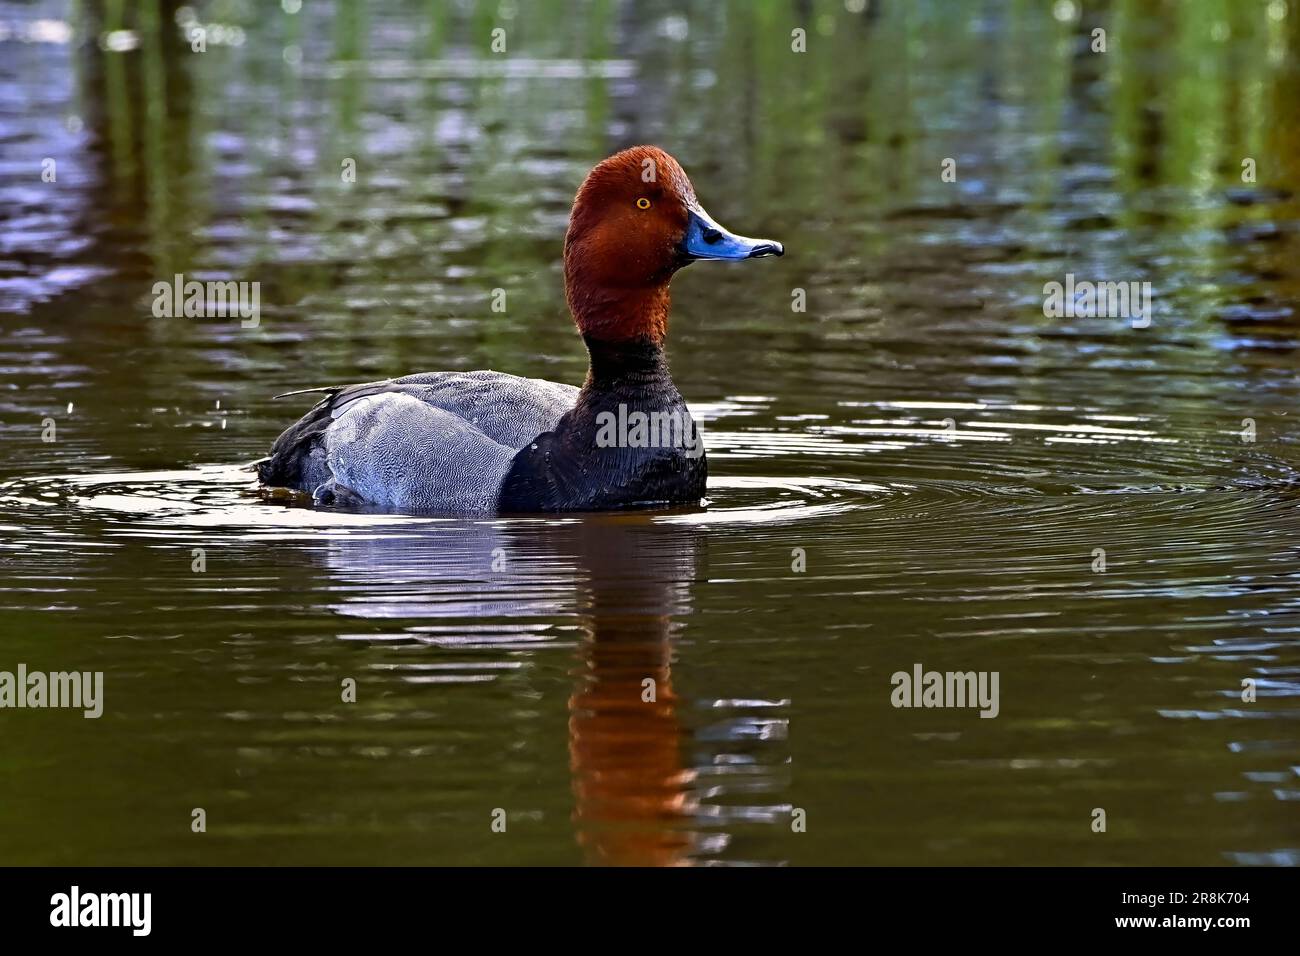 A wild Redhead Duck "Aythya americana", swimming in a calm water pond in rural Alberta Canada Stock Photo